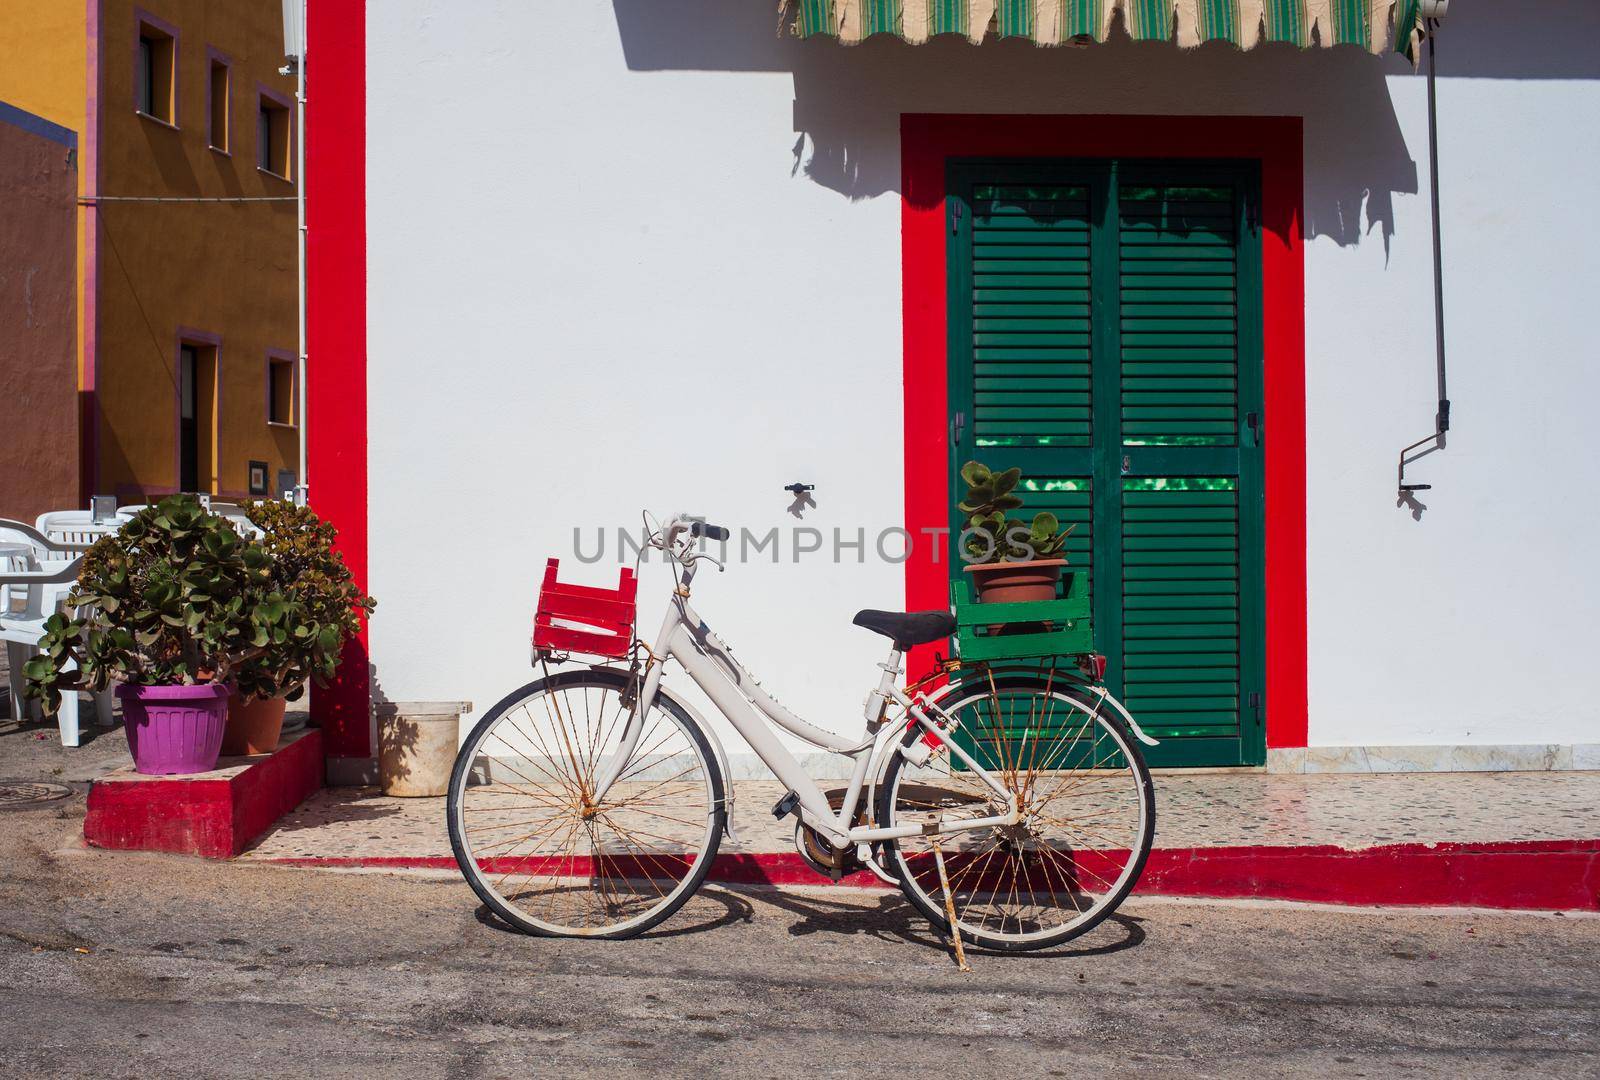 View of touristic flowers pot on a bike, typical colorful house on the background, Linosa